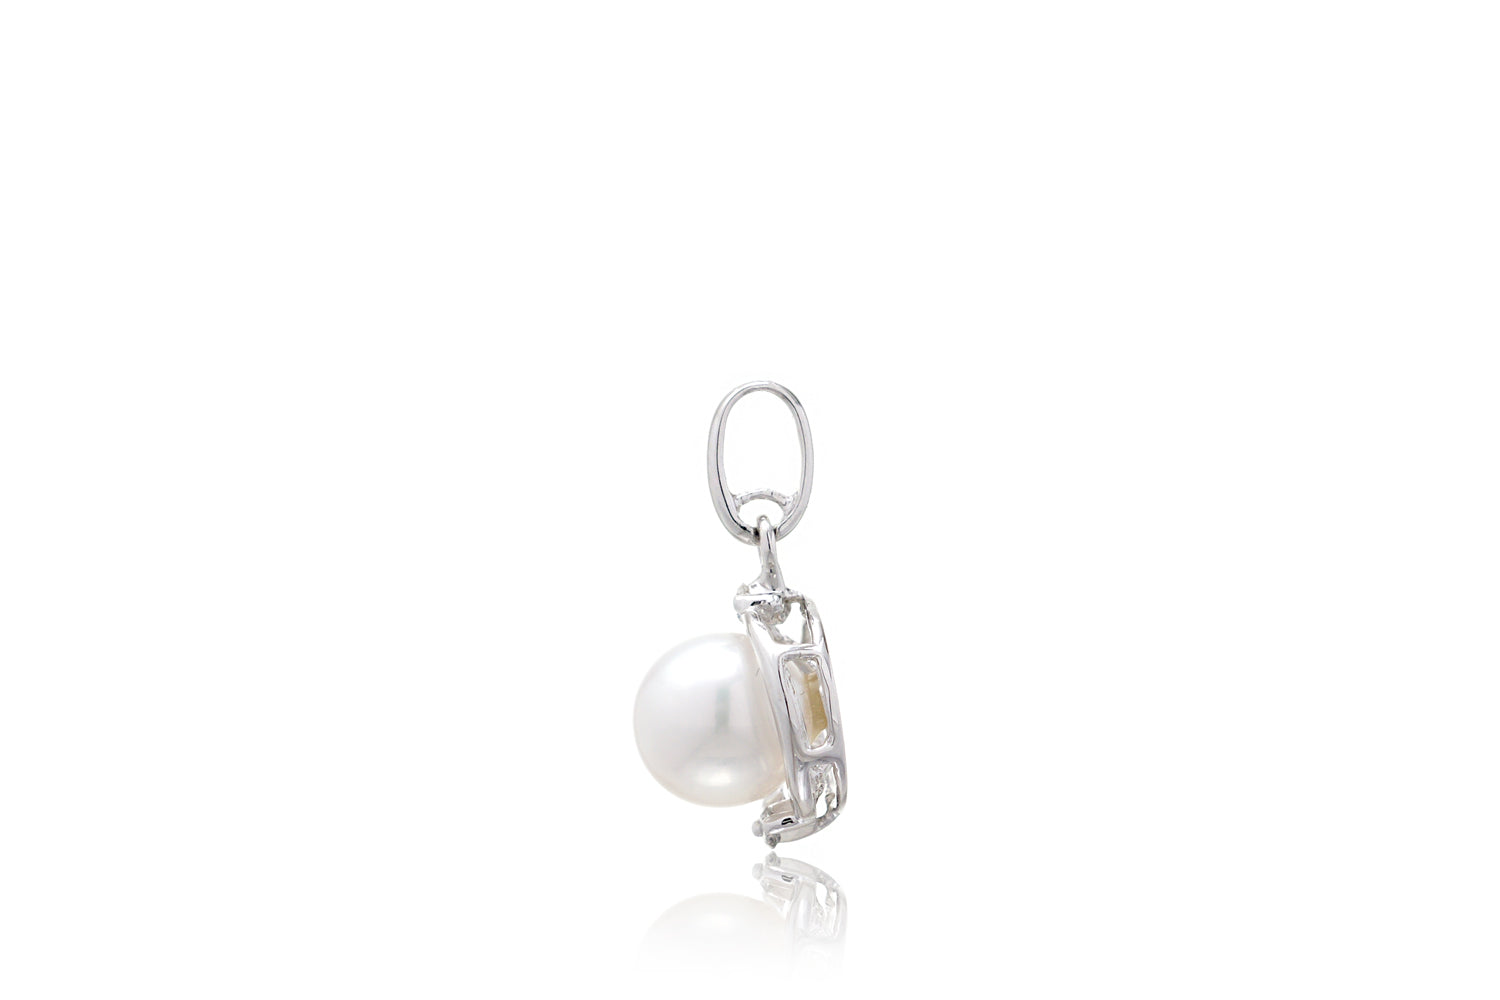 The Embraced Pearl Pendant (6.5mm)